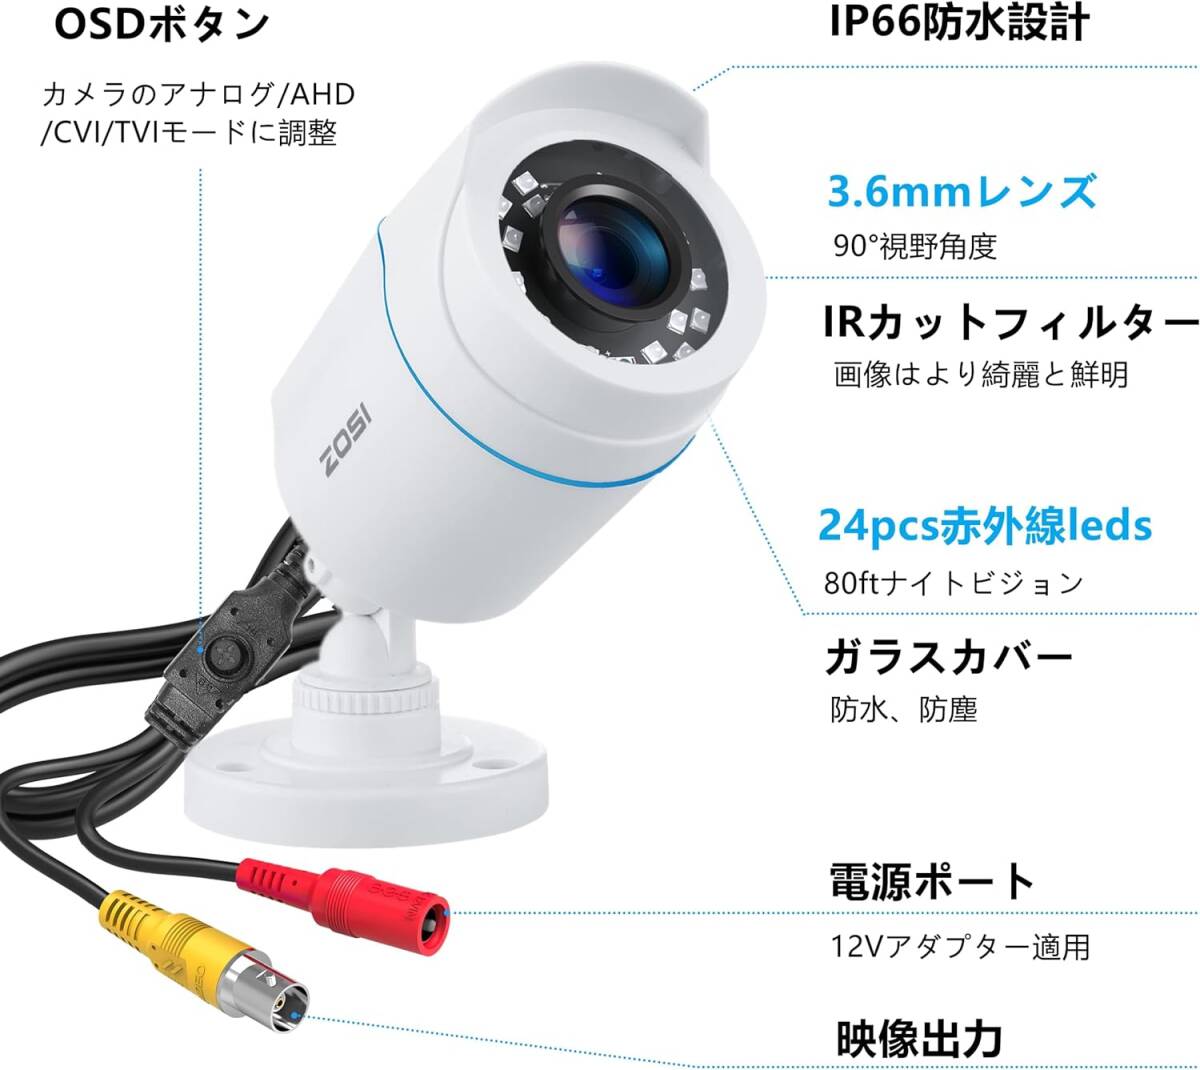 ZOSI security camera outdoors 1080P 200 ten thousand pixels analogue /AHD/CVI/TVI camera infra-red rays 3.6MM wide . lens 960